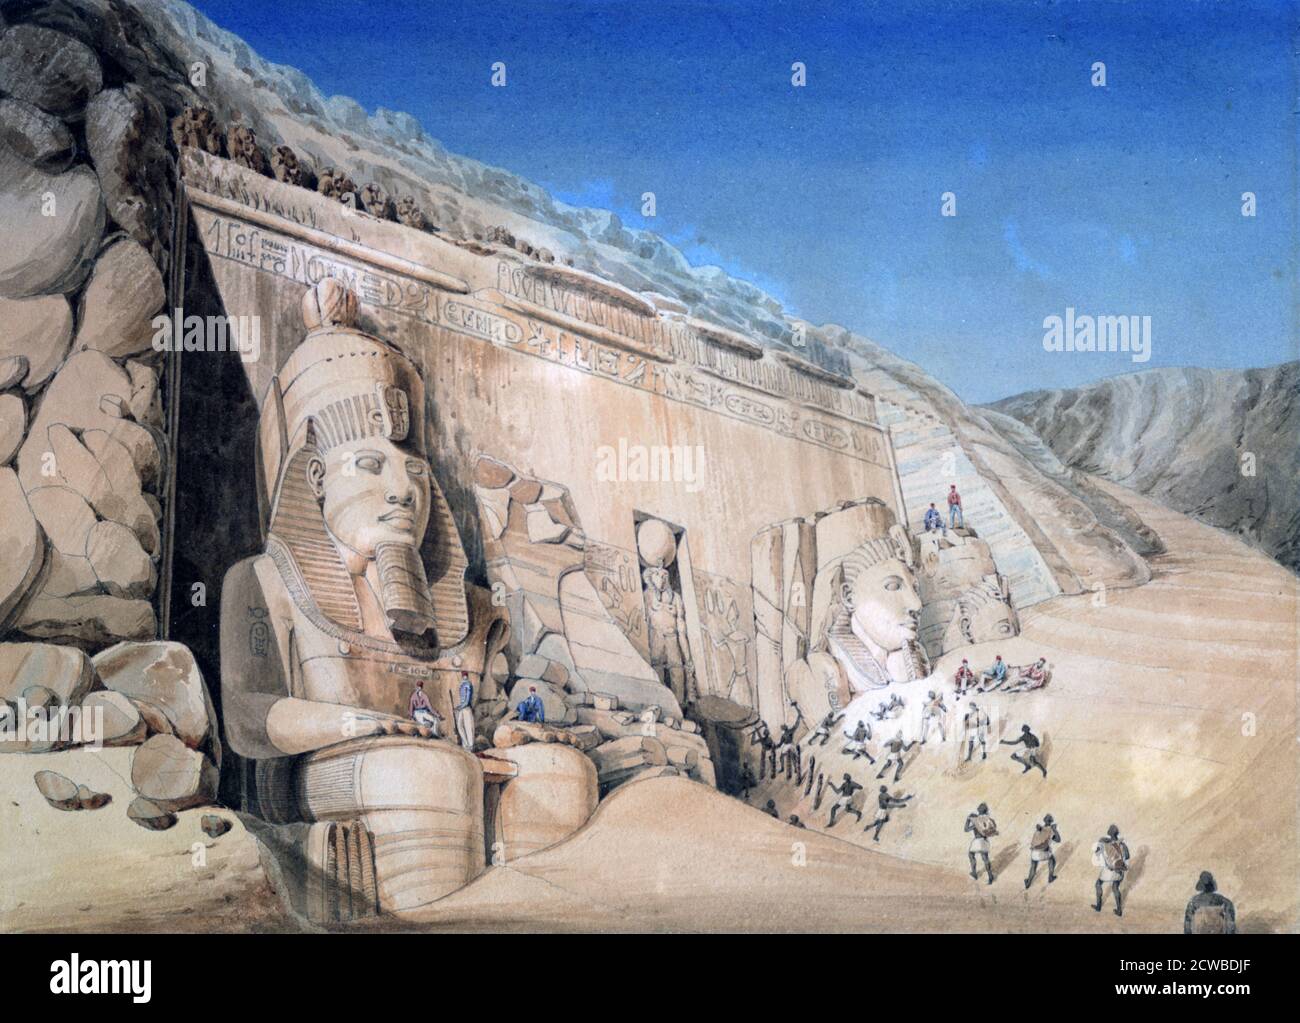 Excavation of the Great Temple of Ramesses II, Abu Simbel', 1819. Louis Maurice Adolphe Linant de Bellefonds better known as Linant Pasha (1799-1883) was an explorer of Egypt and chief engineer of the Suez Canal. Found in the collection of the Victoria & Albert Museum, London. By the French artist Louis M. A. Linant de Bellefonds. Stock Photo